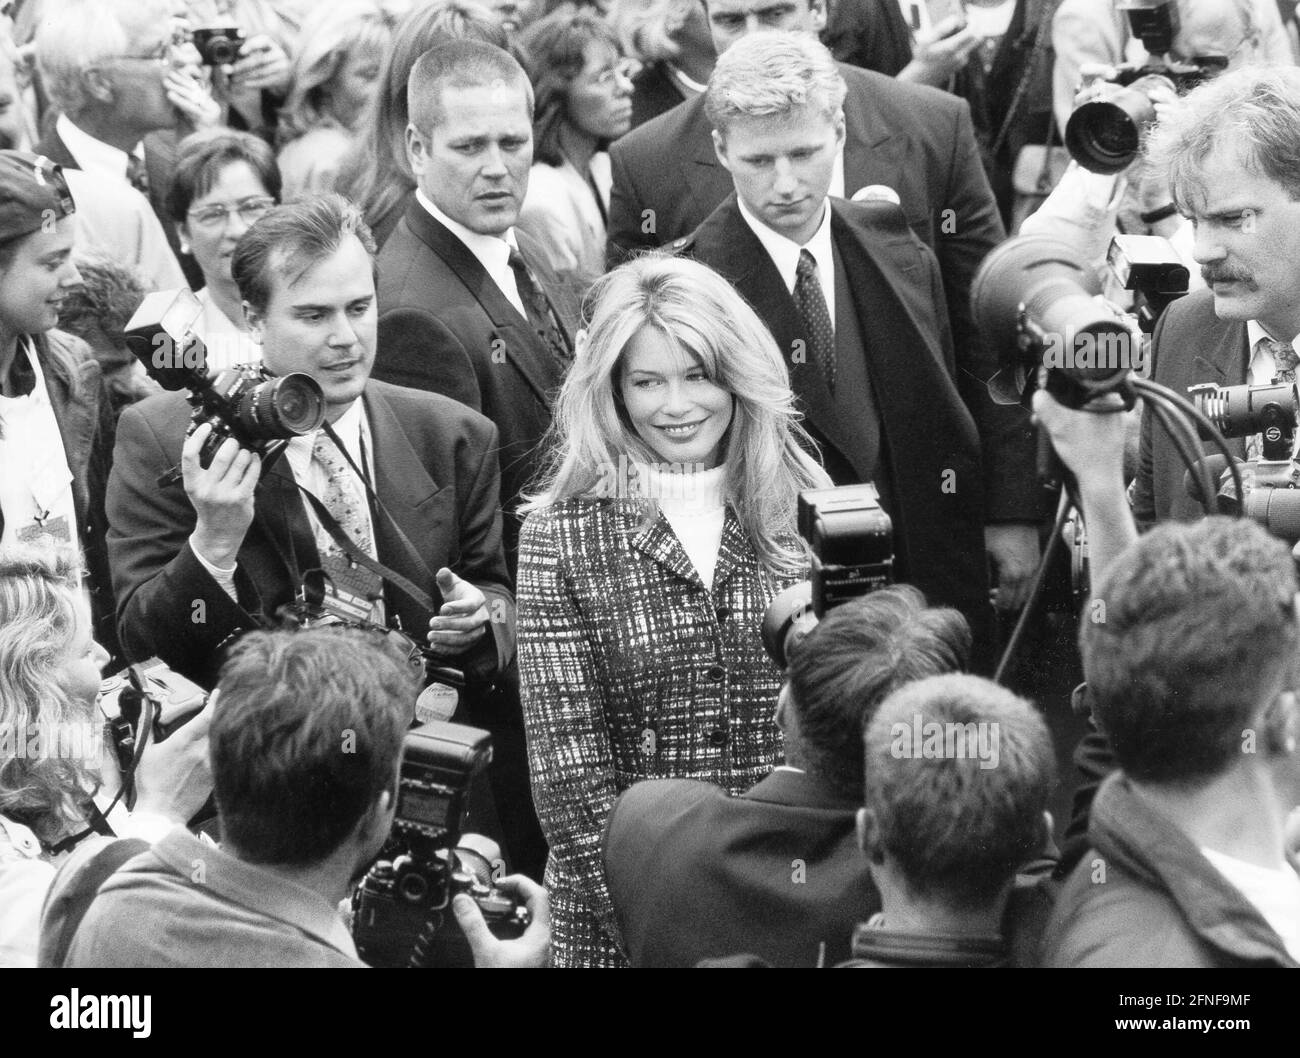 Claudia Schiffer with fans. [automated translation] Stock Photo